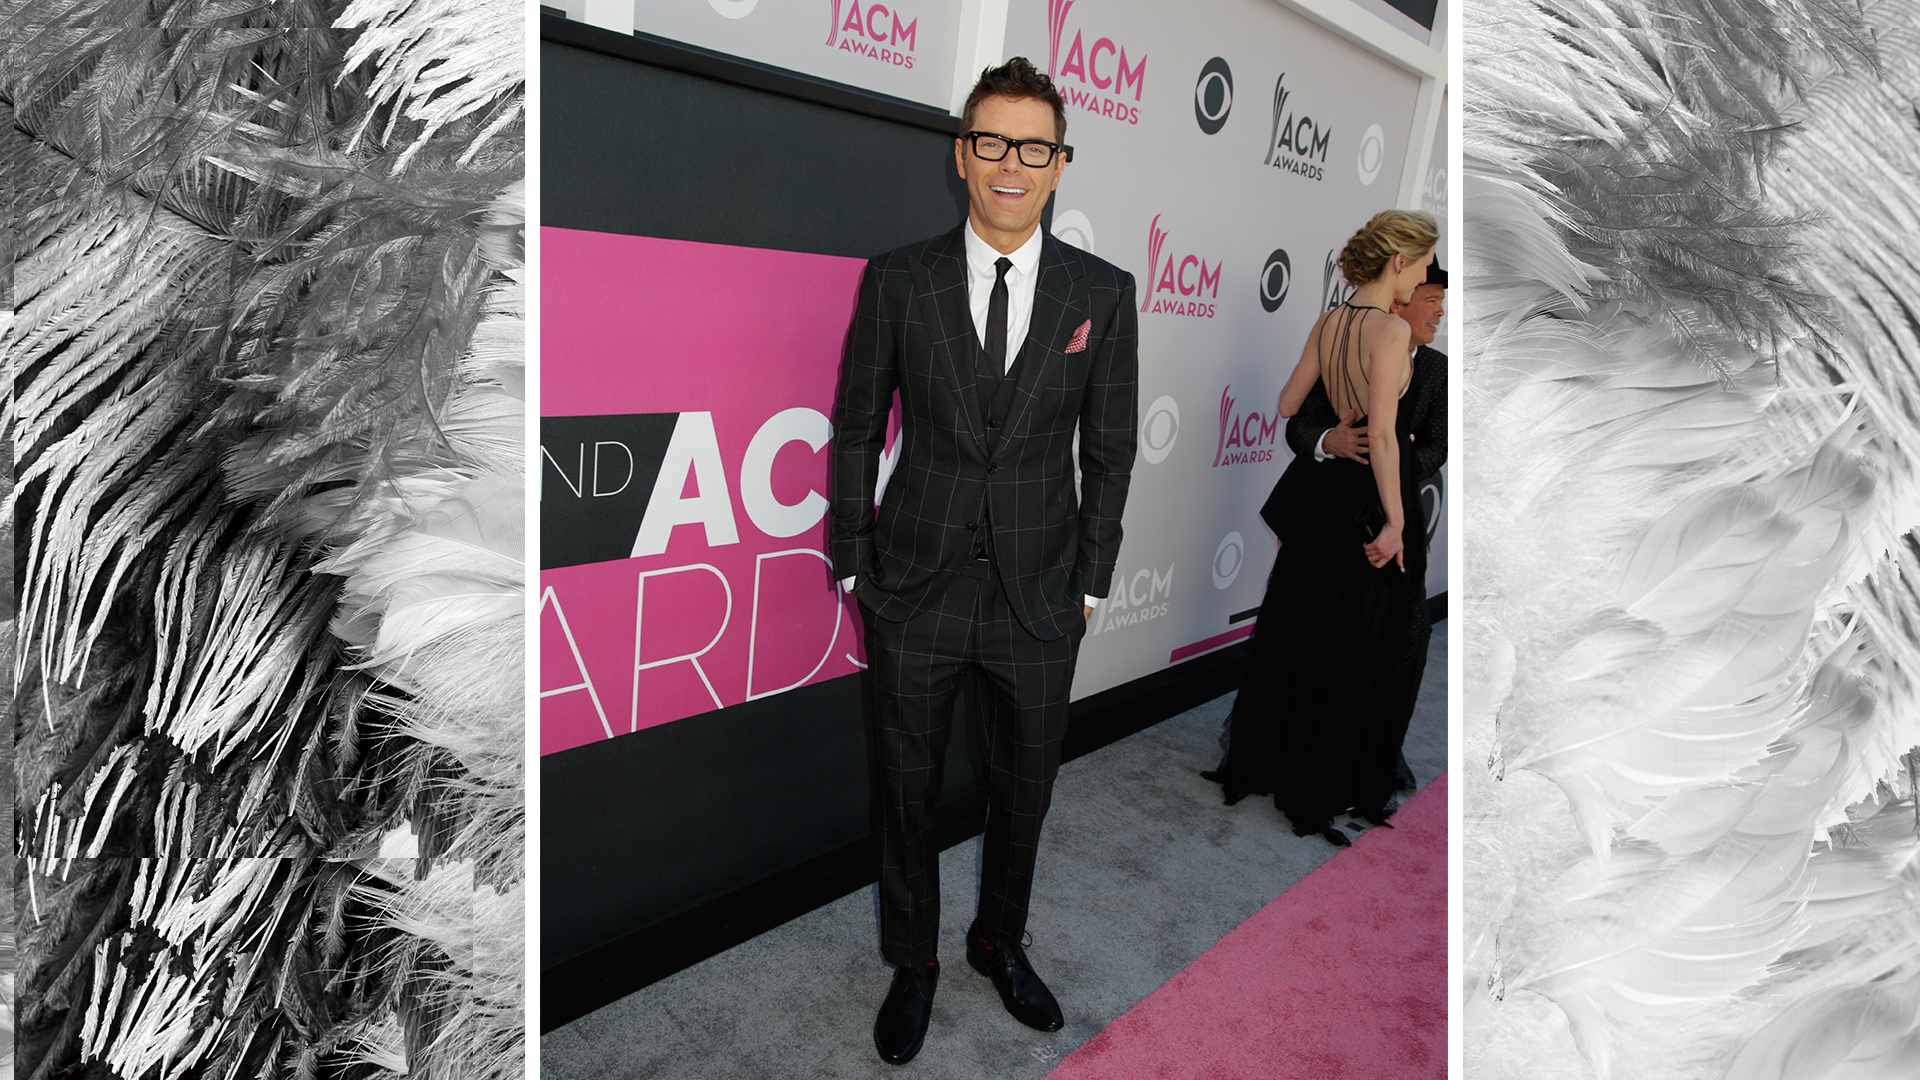 iHeartRadio personality Bobby Bones sports a polished suit at the 52nd ACM Awards.